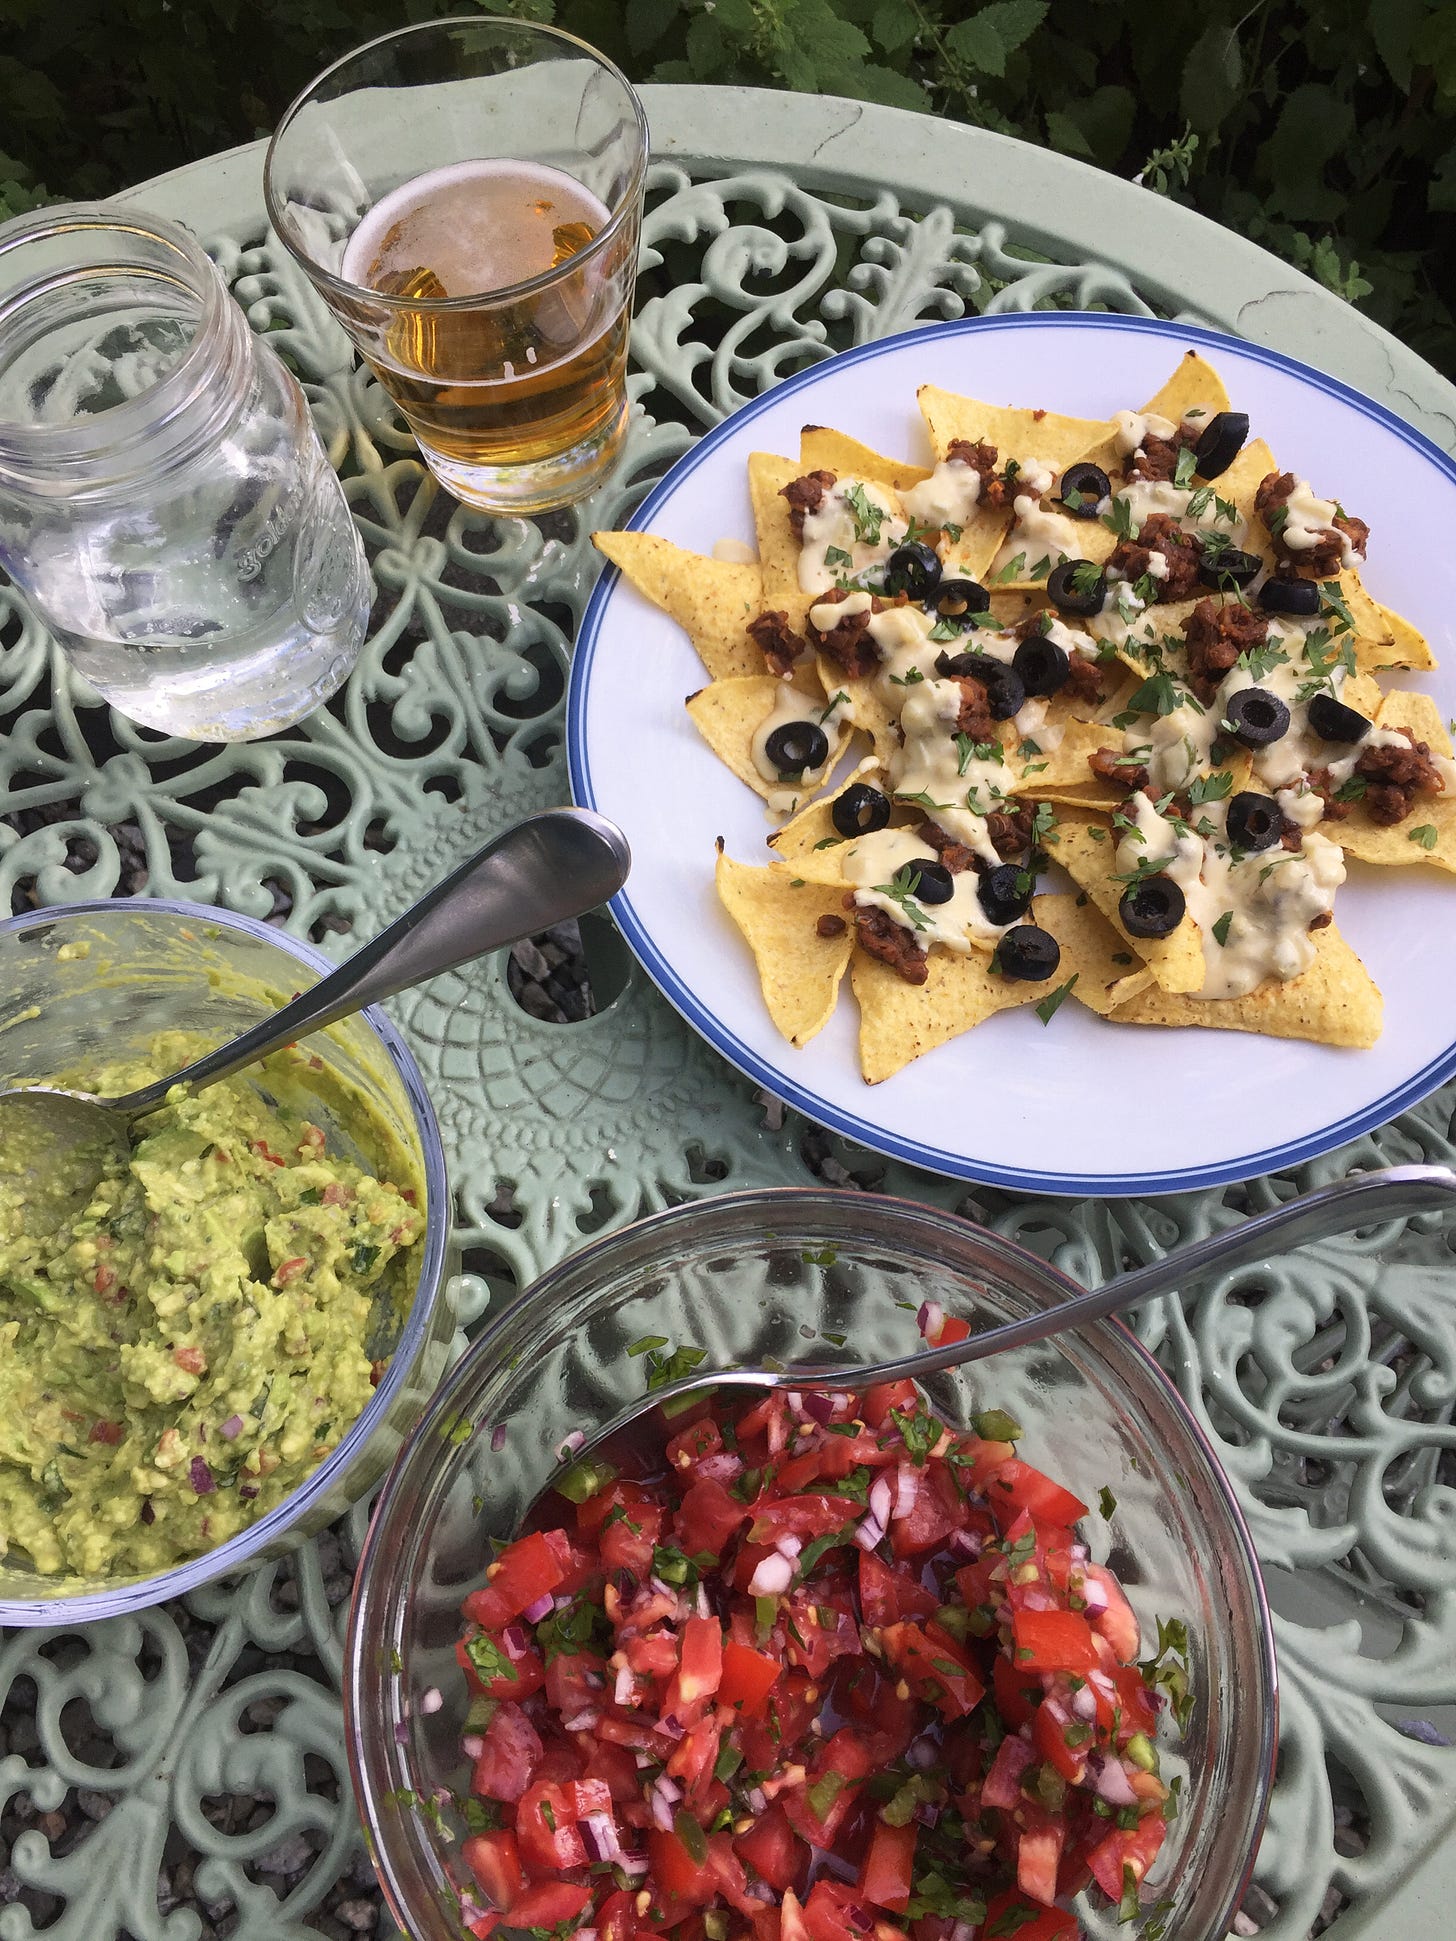 a wrought-iron table with a plate of nachos next to bowls of guacamole and pico de gallo. On the nachos is a cheezy sauce, sliced black olives, and cilantro. A spoon sits in each bowl.